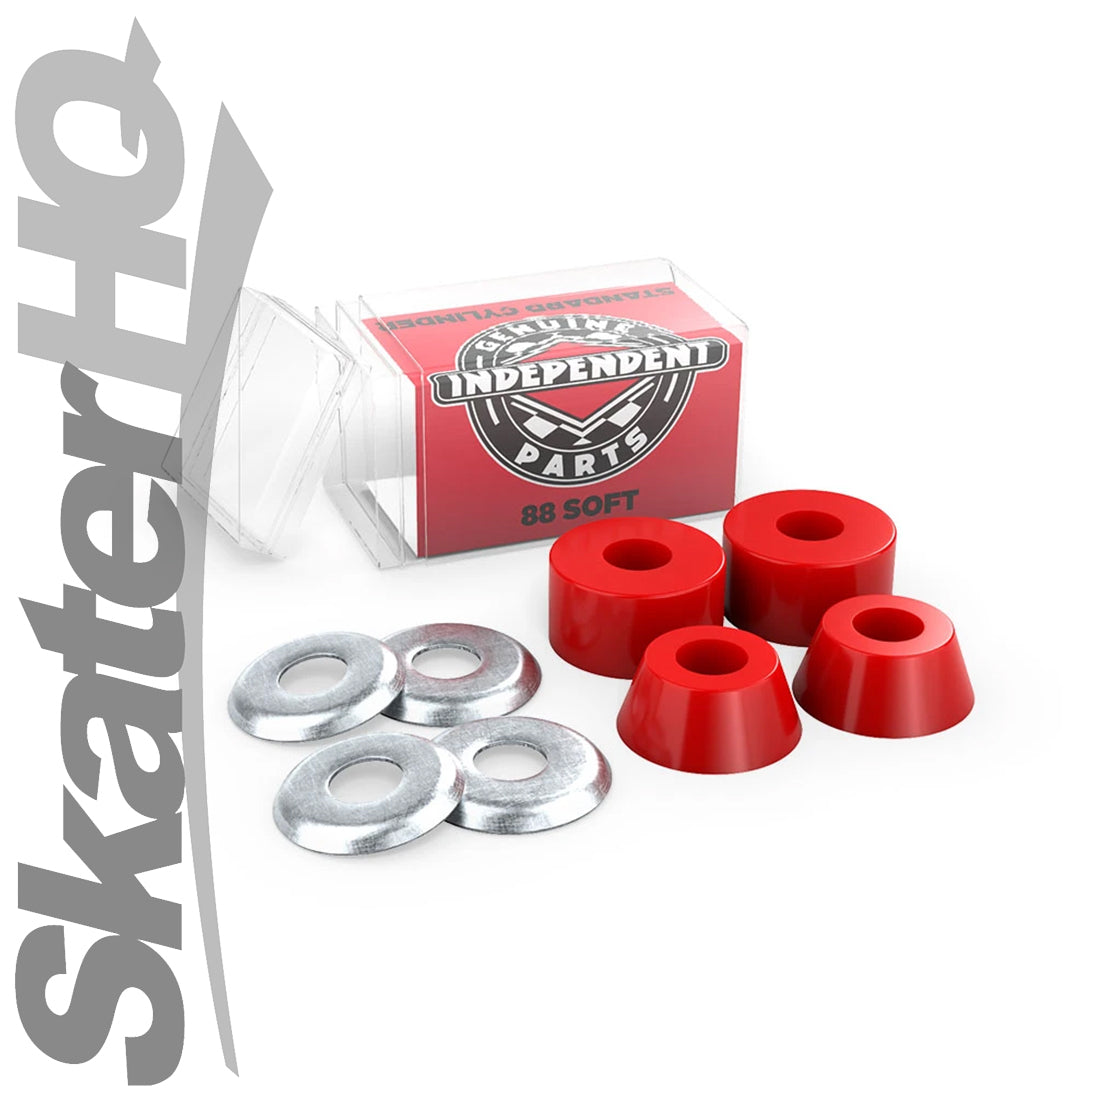 Independent STD/Cylinder 88a Soft Cushions - Red Skateboard Hardware and Parts